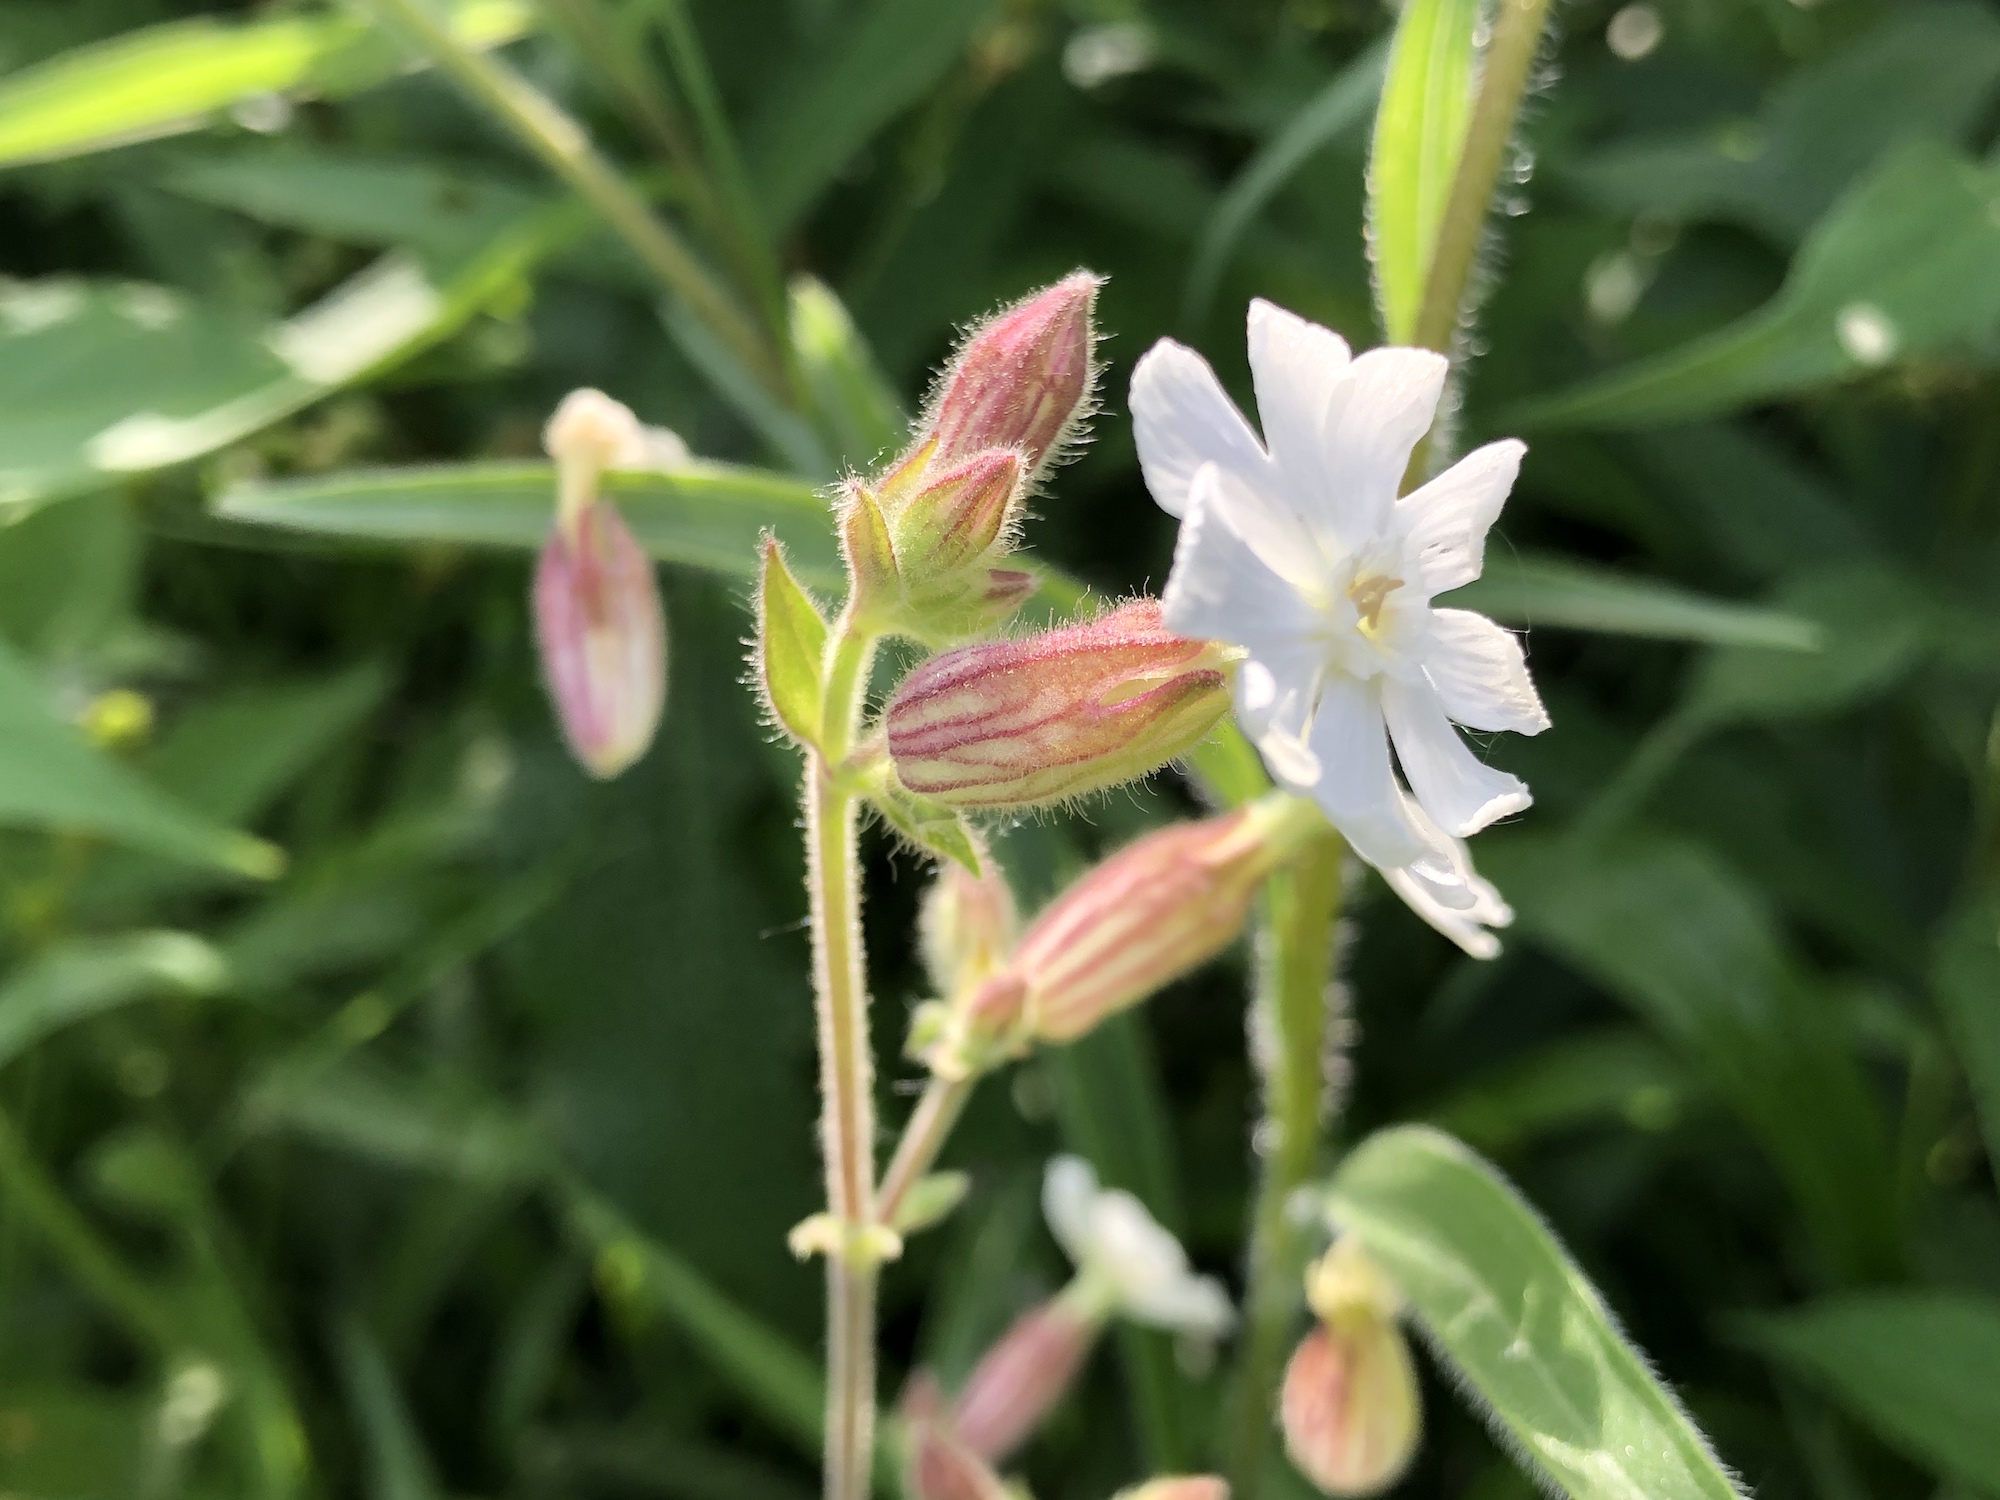 White Campion on the banks of the retaining pond on June 20, 2019.